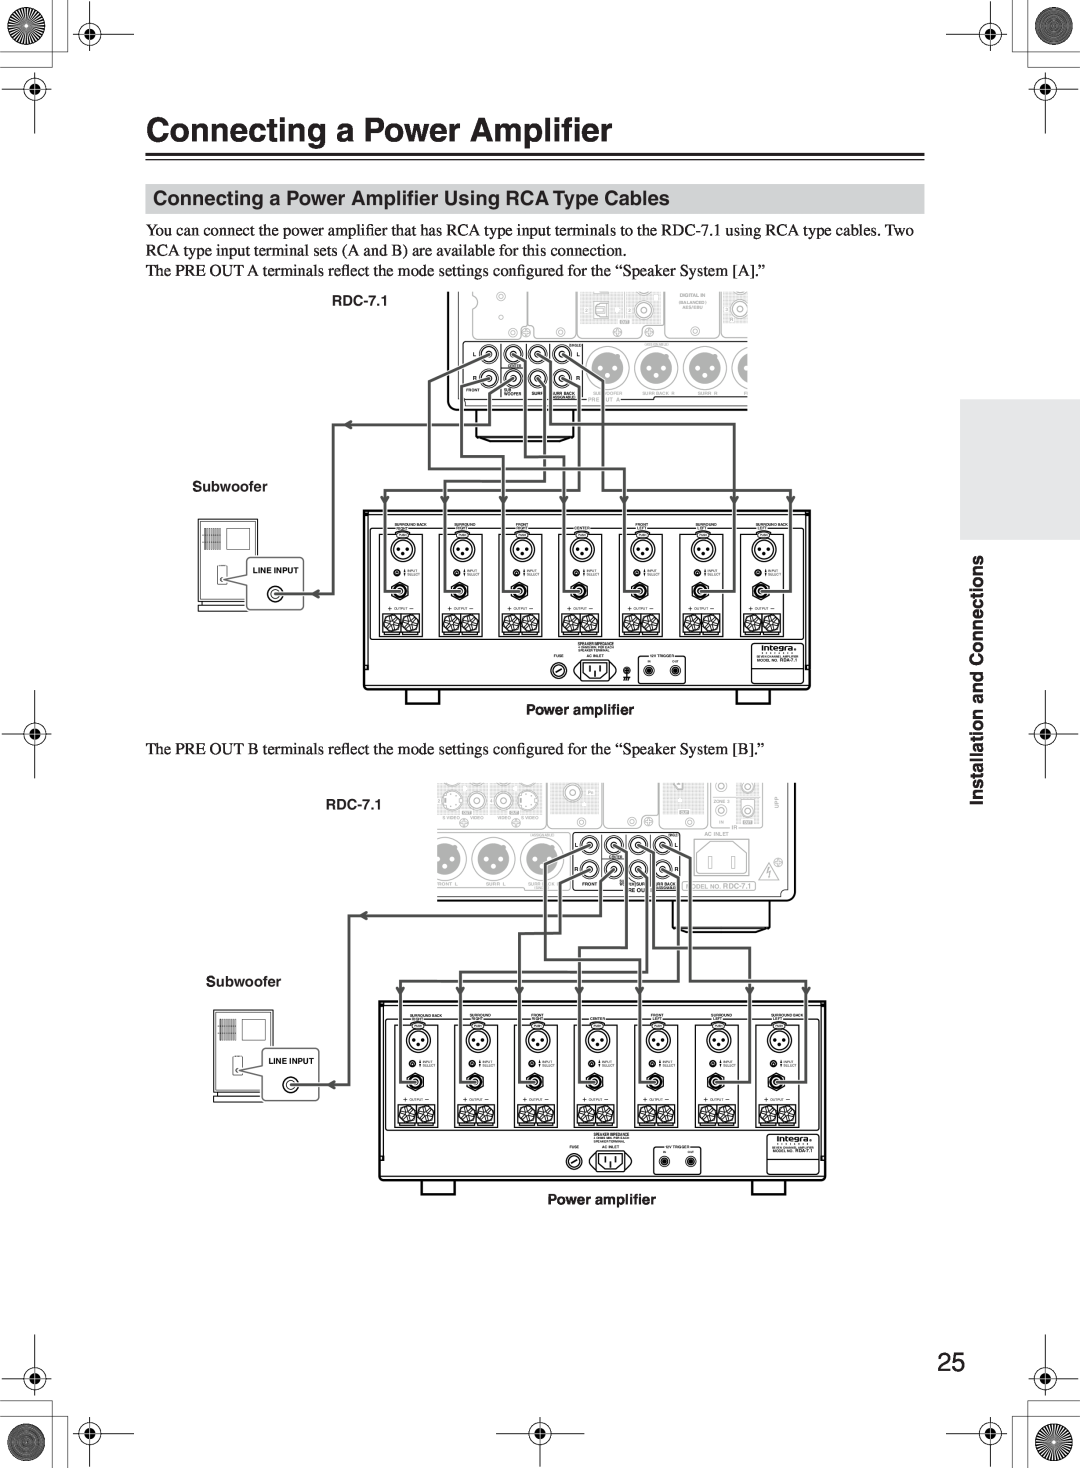 Integra RDC-7.1 instruction manual Connecting a Power Ampliﬁer Using RCA Type Cables, Installation and Connections 